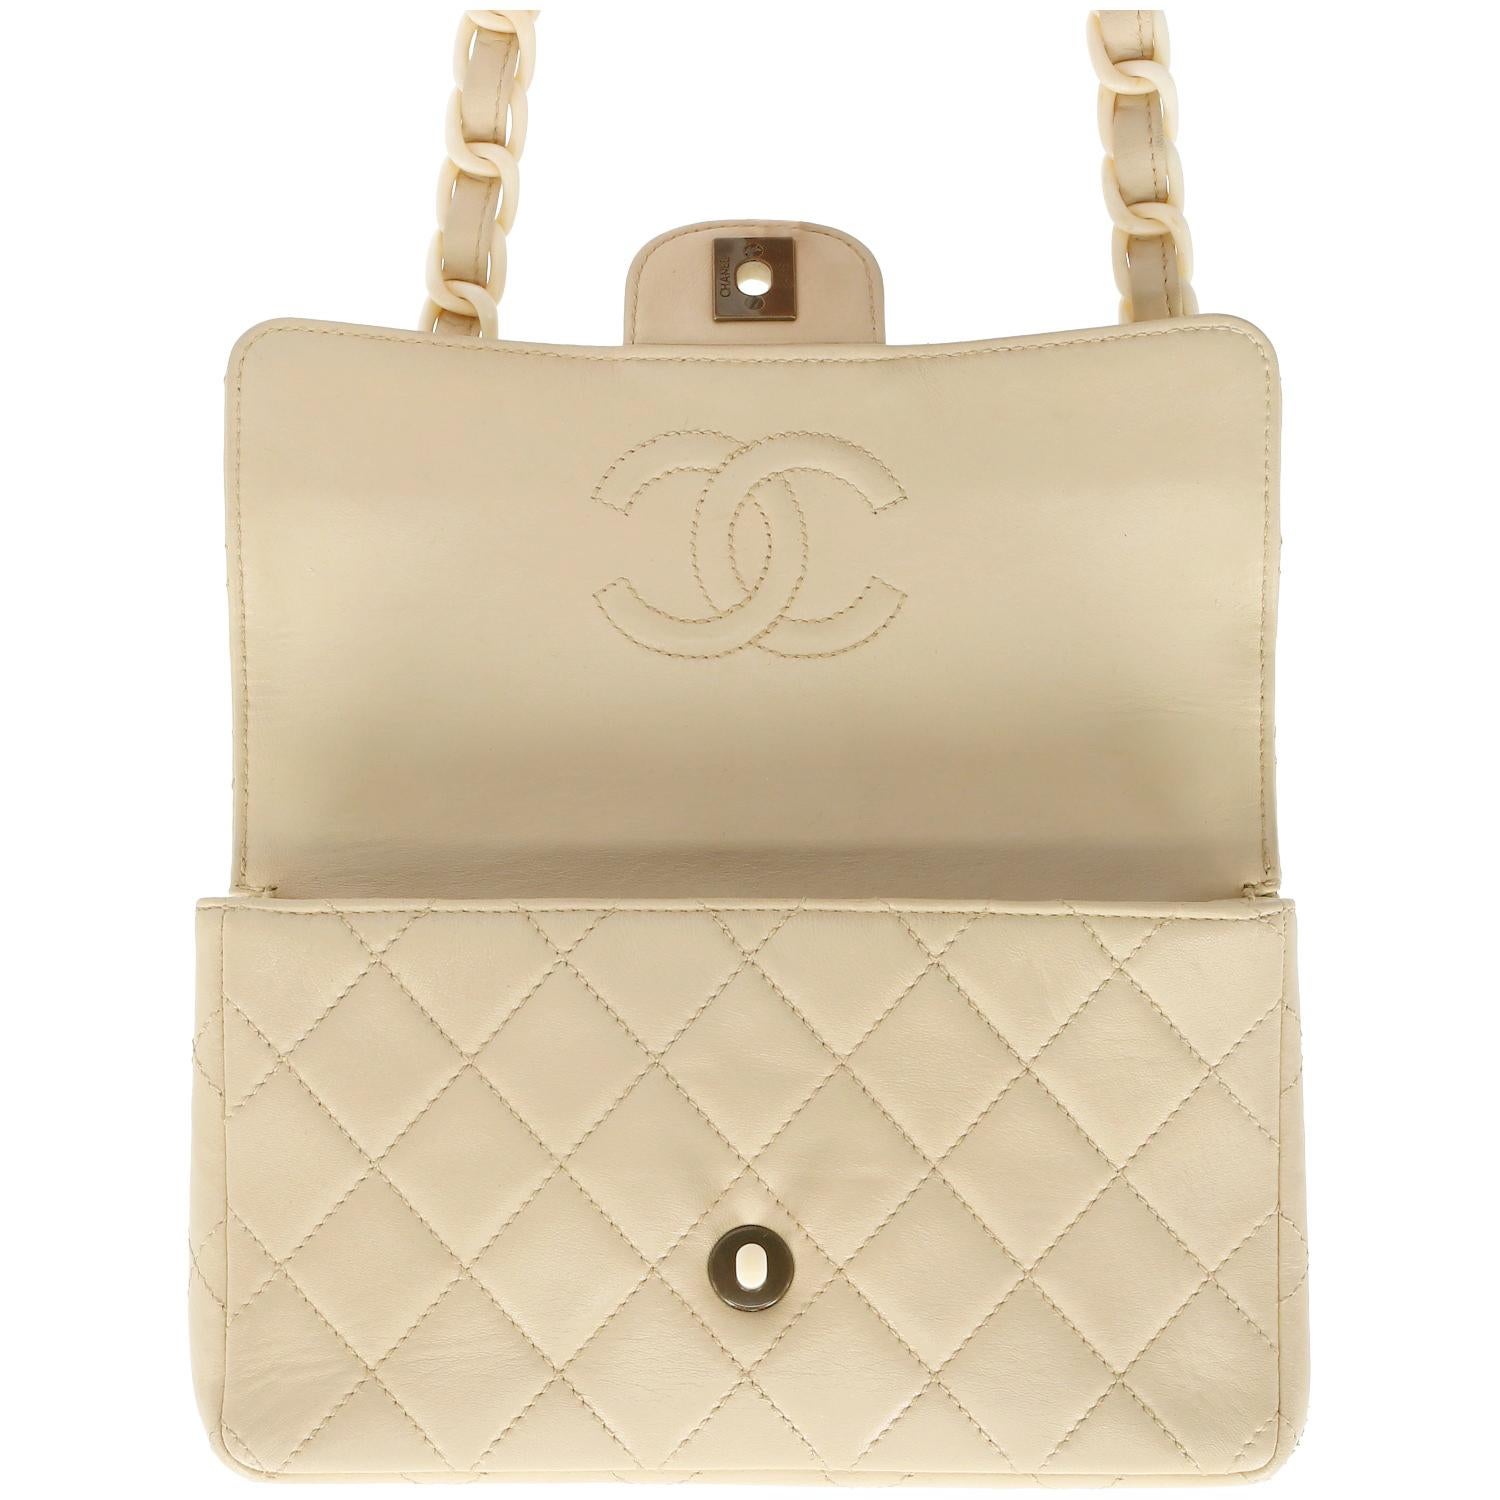 1990s Chanel beige leather bag  4